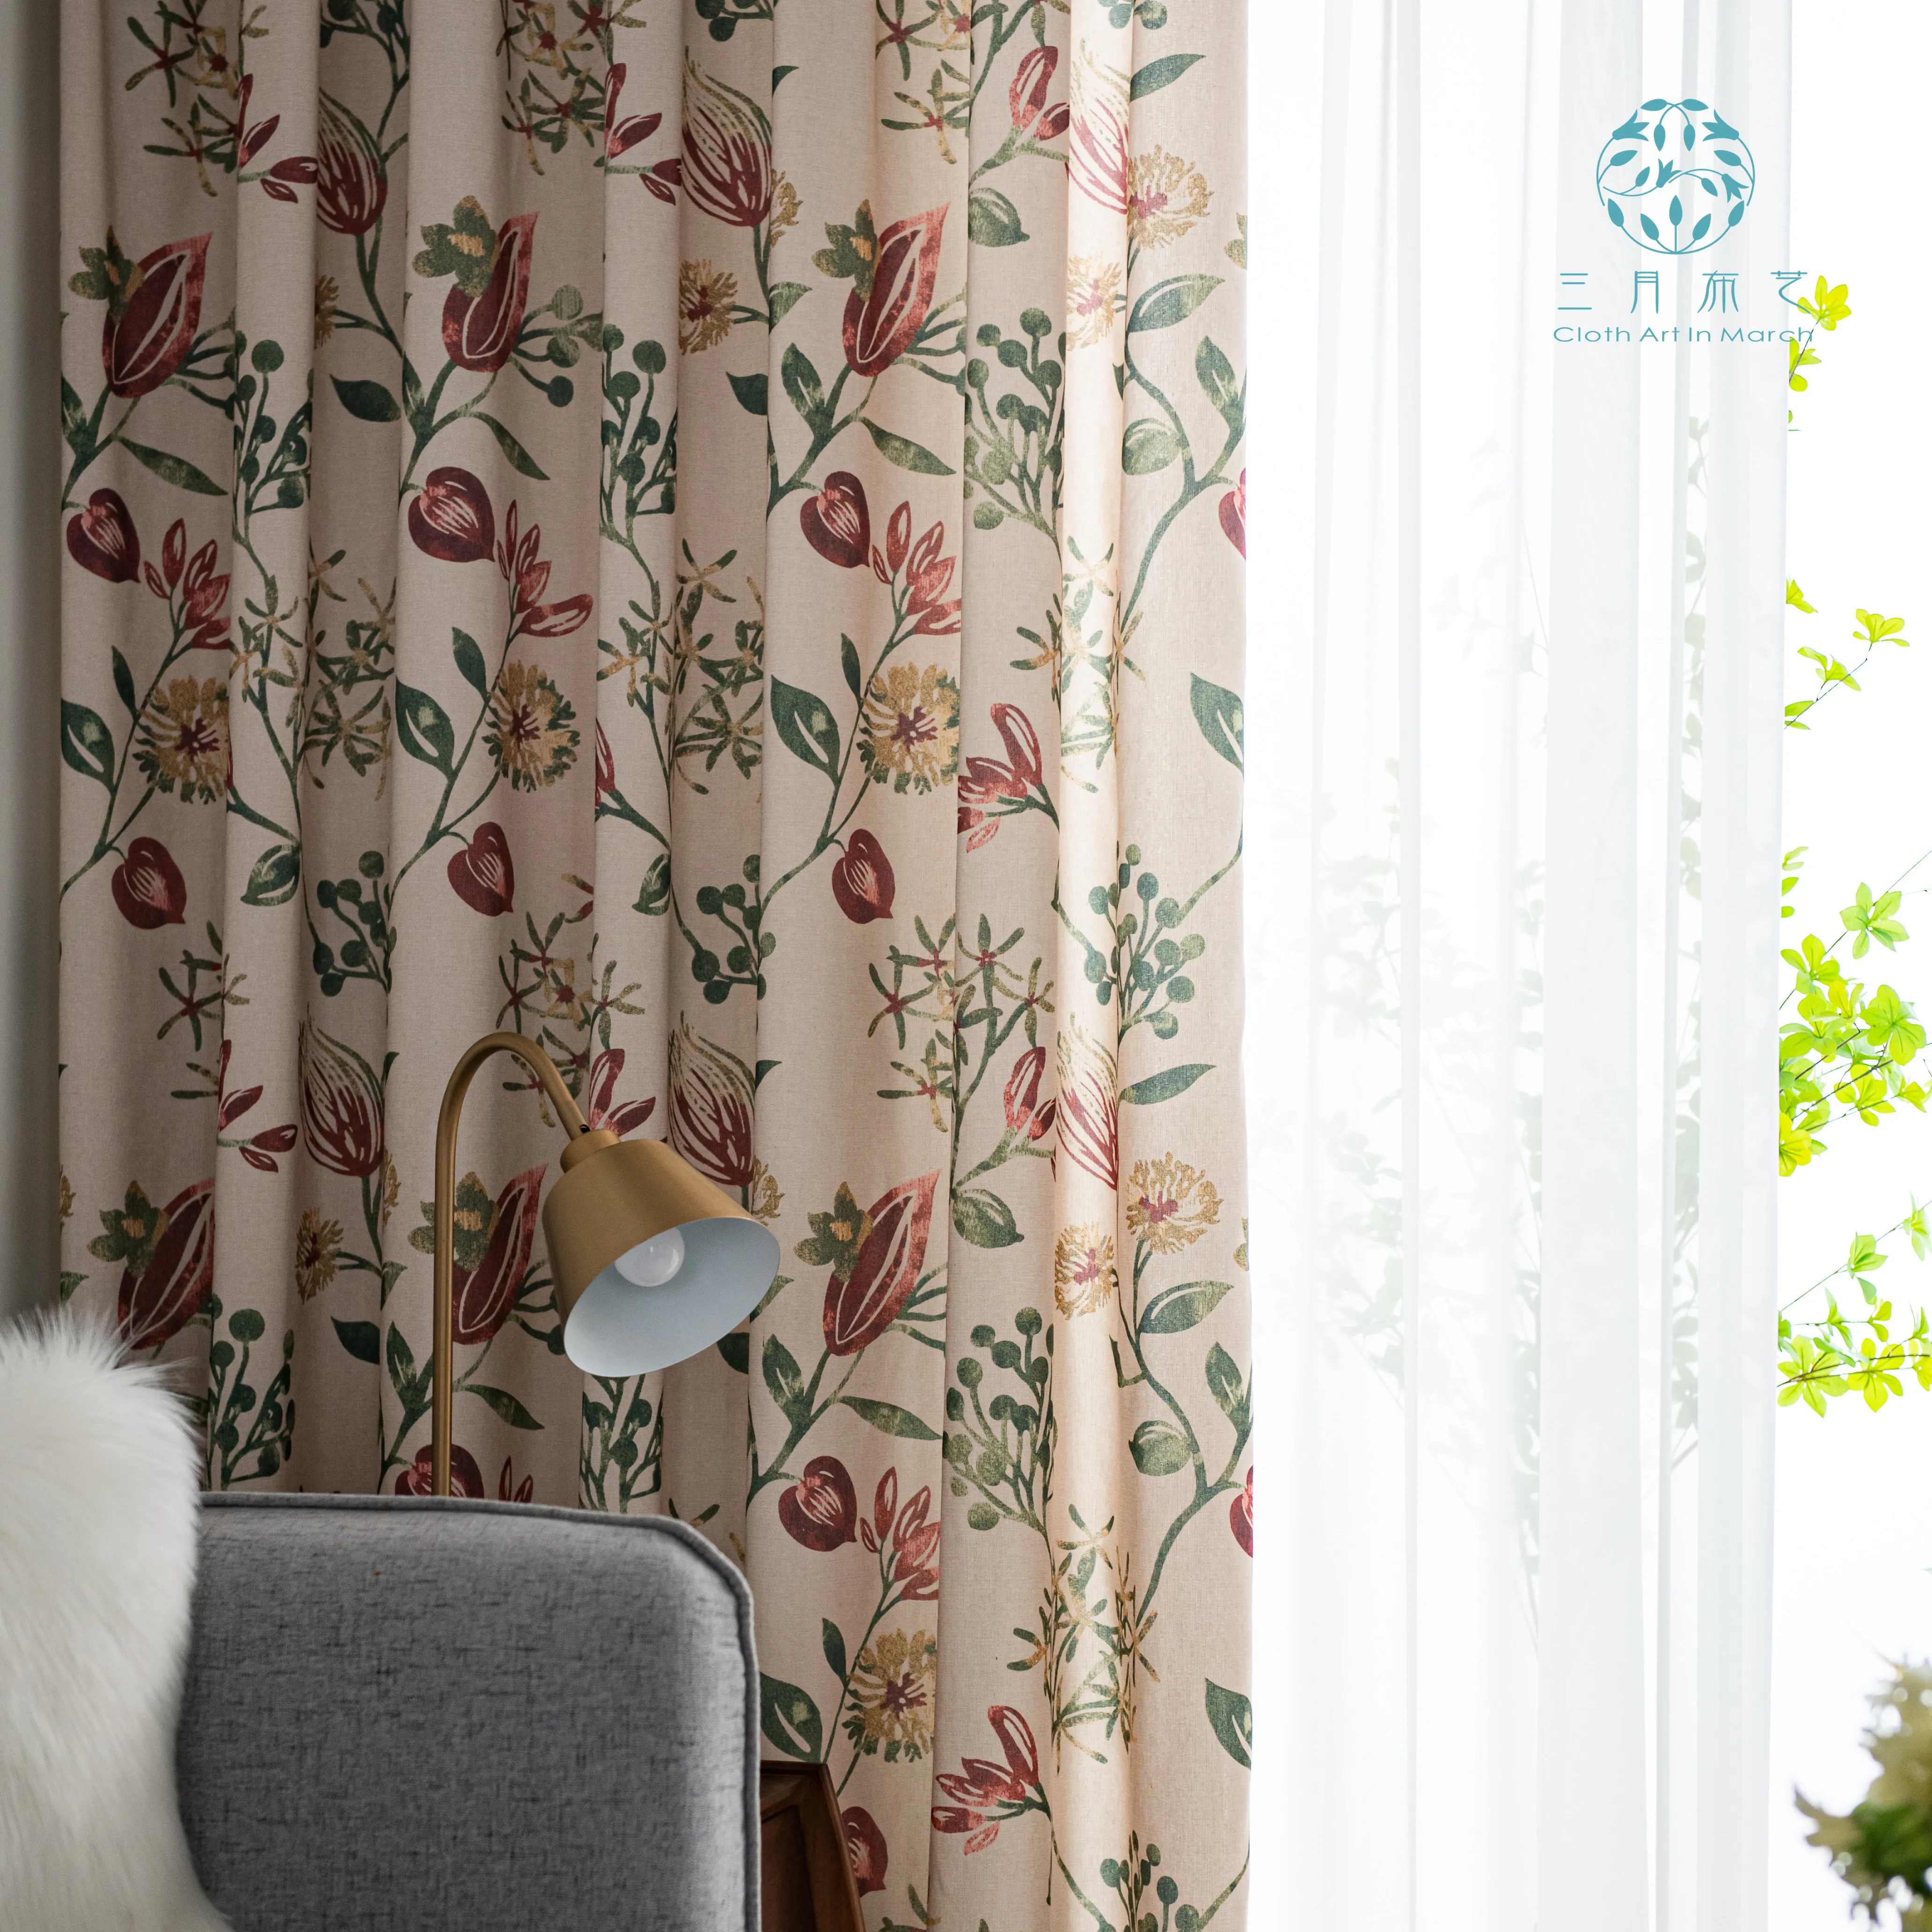 American living curtains Rustic Home Decor Birds Pattern Window Treatments Printed Bedroom Drapes Single Curtain Panels A312241M